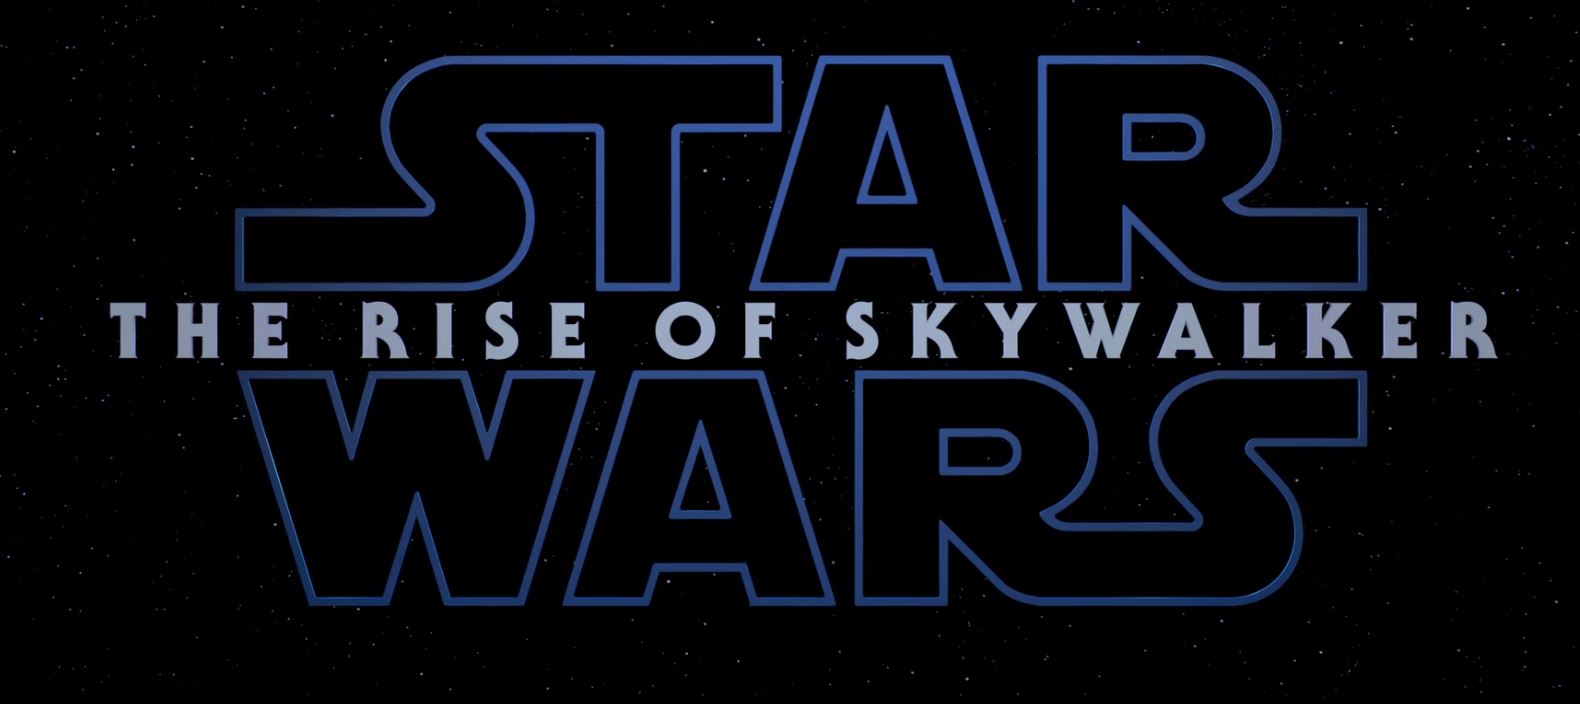 Spoiler-Filled Review: ‘Star Wars: The Rise of Skywalker’